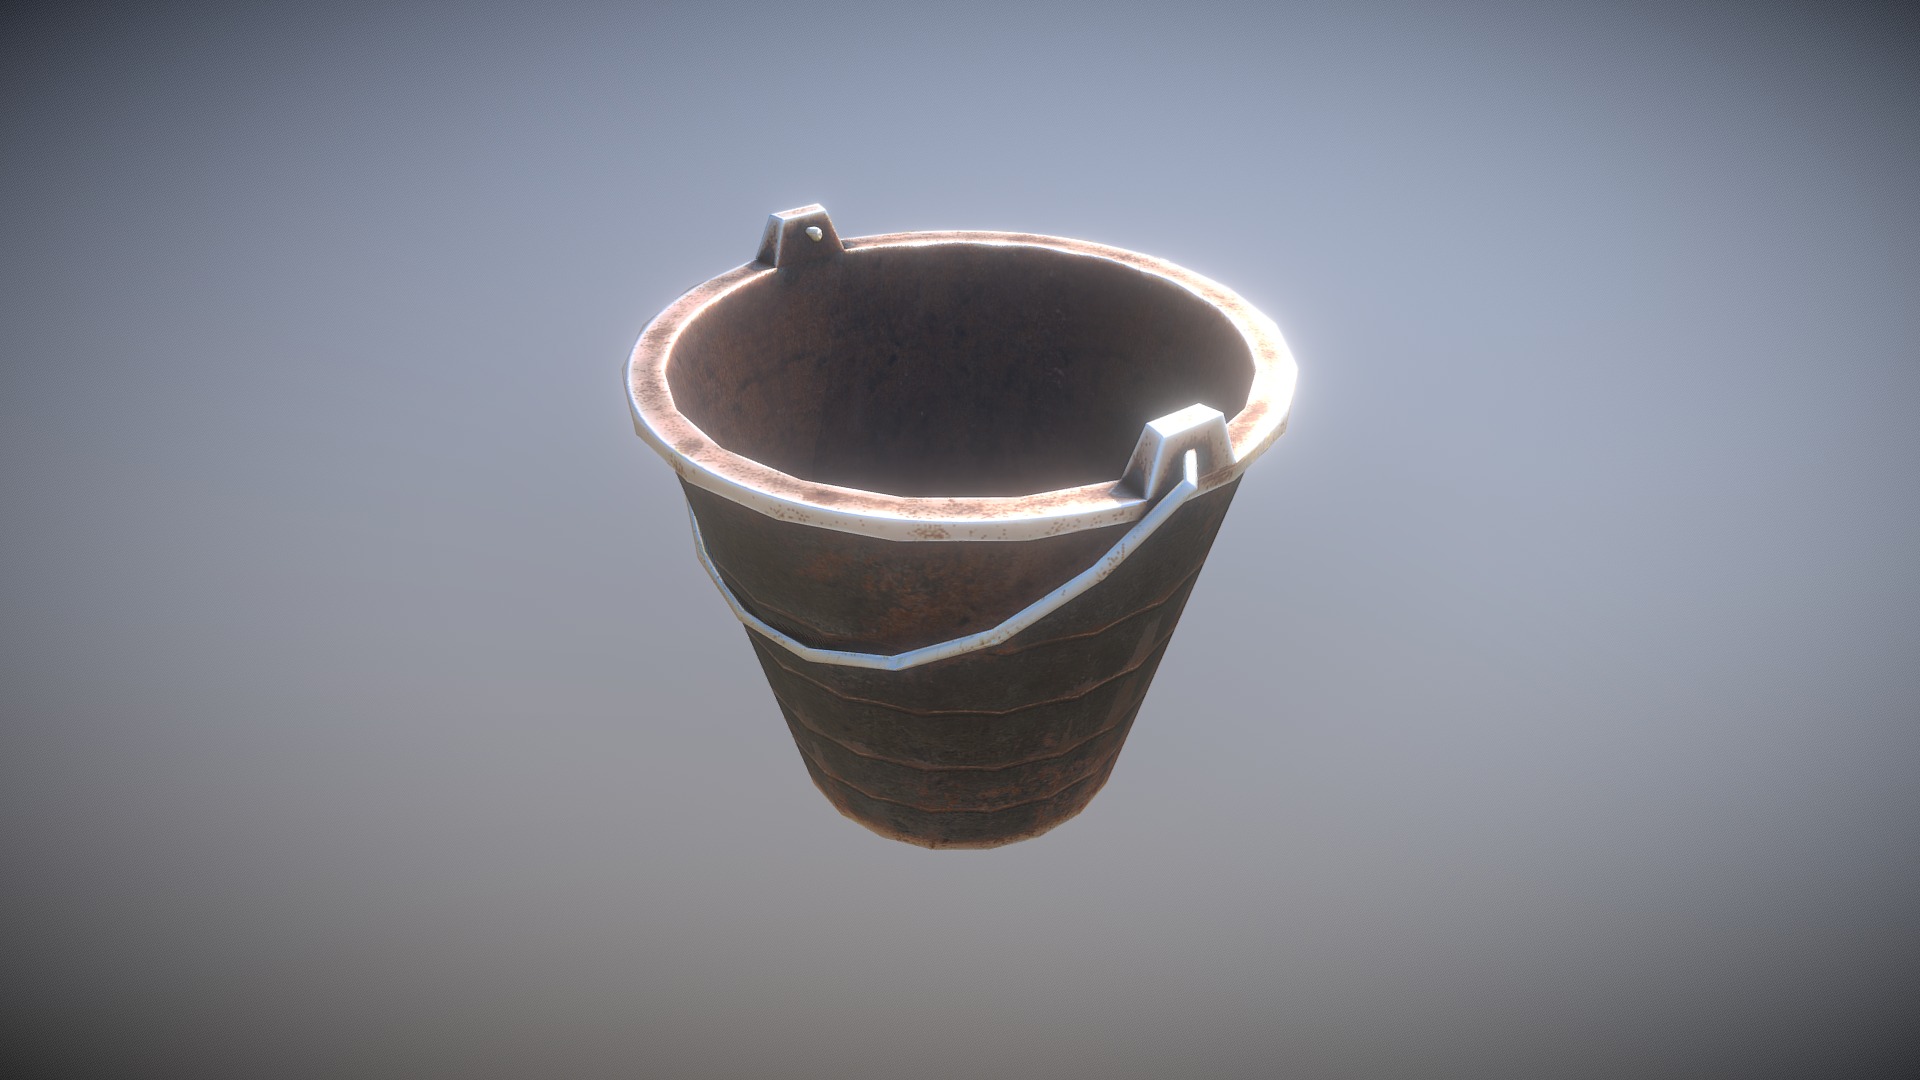 3D model Bucket - This is a 3D model of the Bucket. The 3D model is about a cup on a surface.